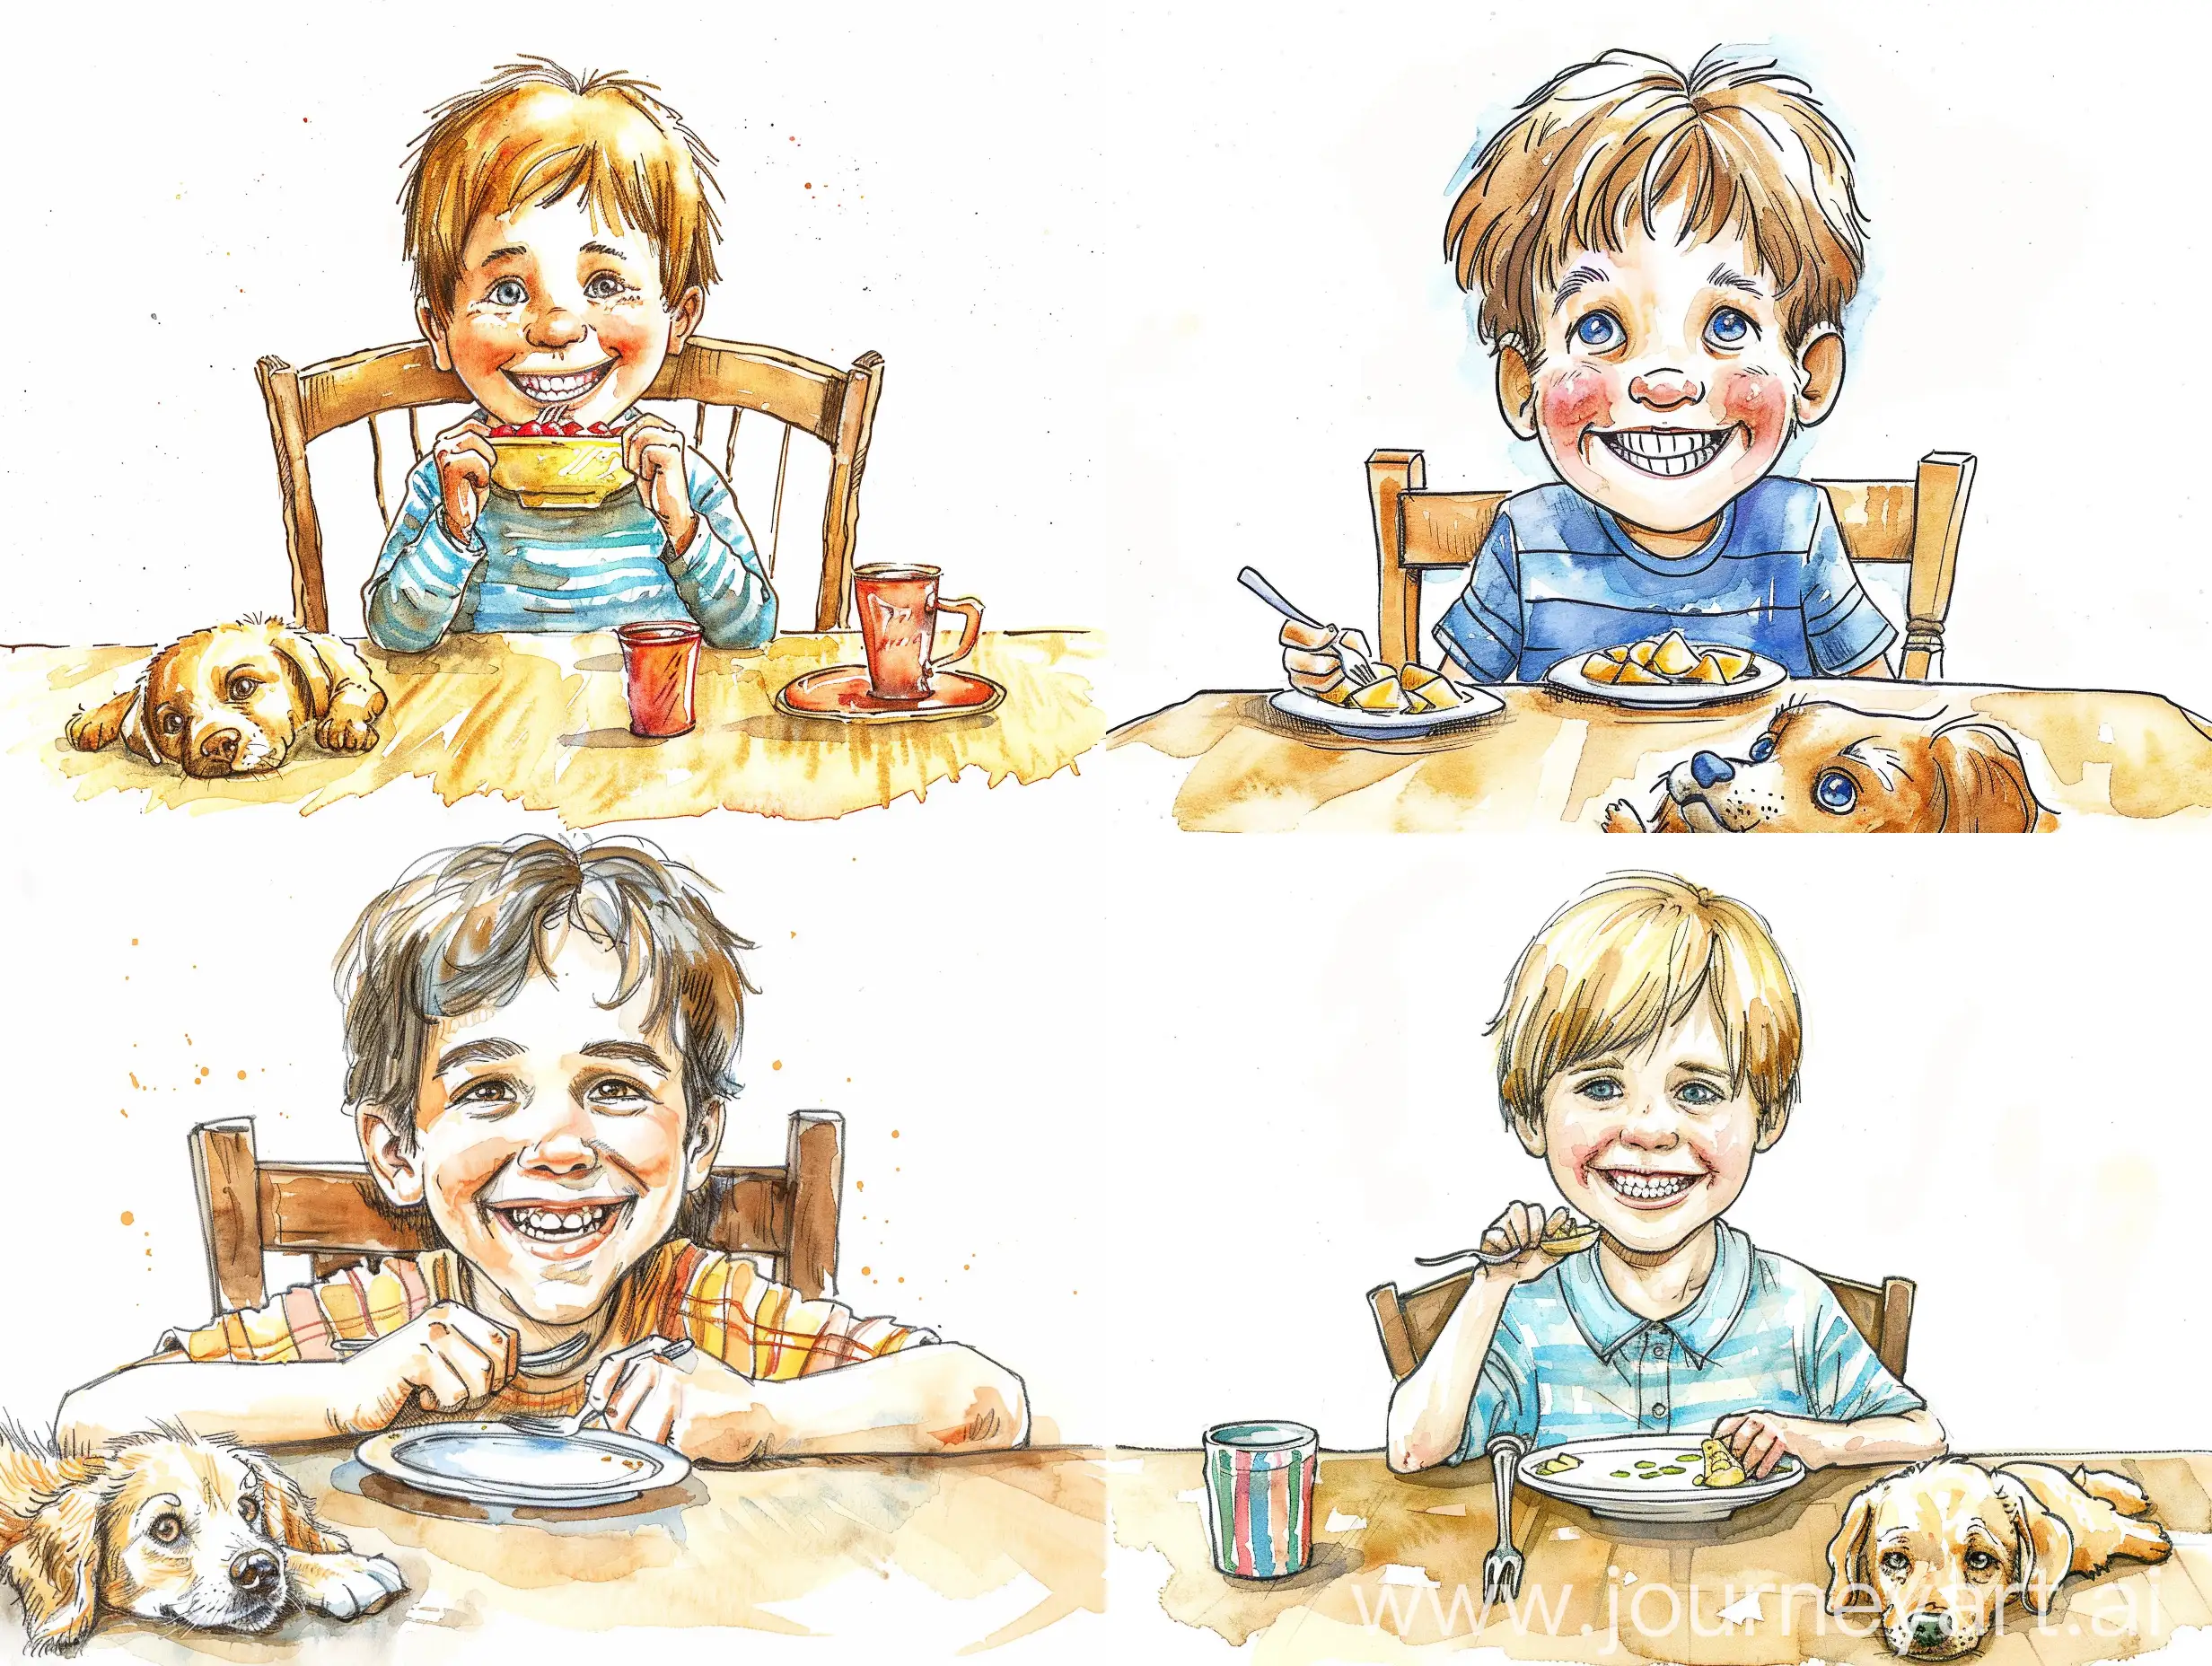 A young smiling boy eating at a dinner table with a dog laying on the floor by his chair, lots of face detail, watercolor and ink drawing, clipart, happy, bright colors, gentle smile, beautiful watercolor ink wash coloring, thick pencil lines, Jon klassen, Adrian tomine, watercolor illustrations clipart, watercolor illlustrations for kids and children, book illustrations, plain white background